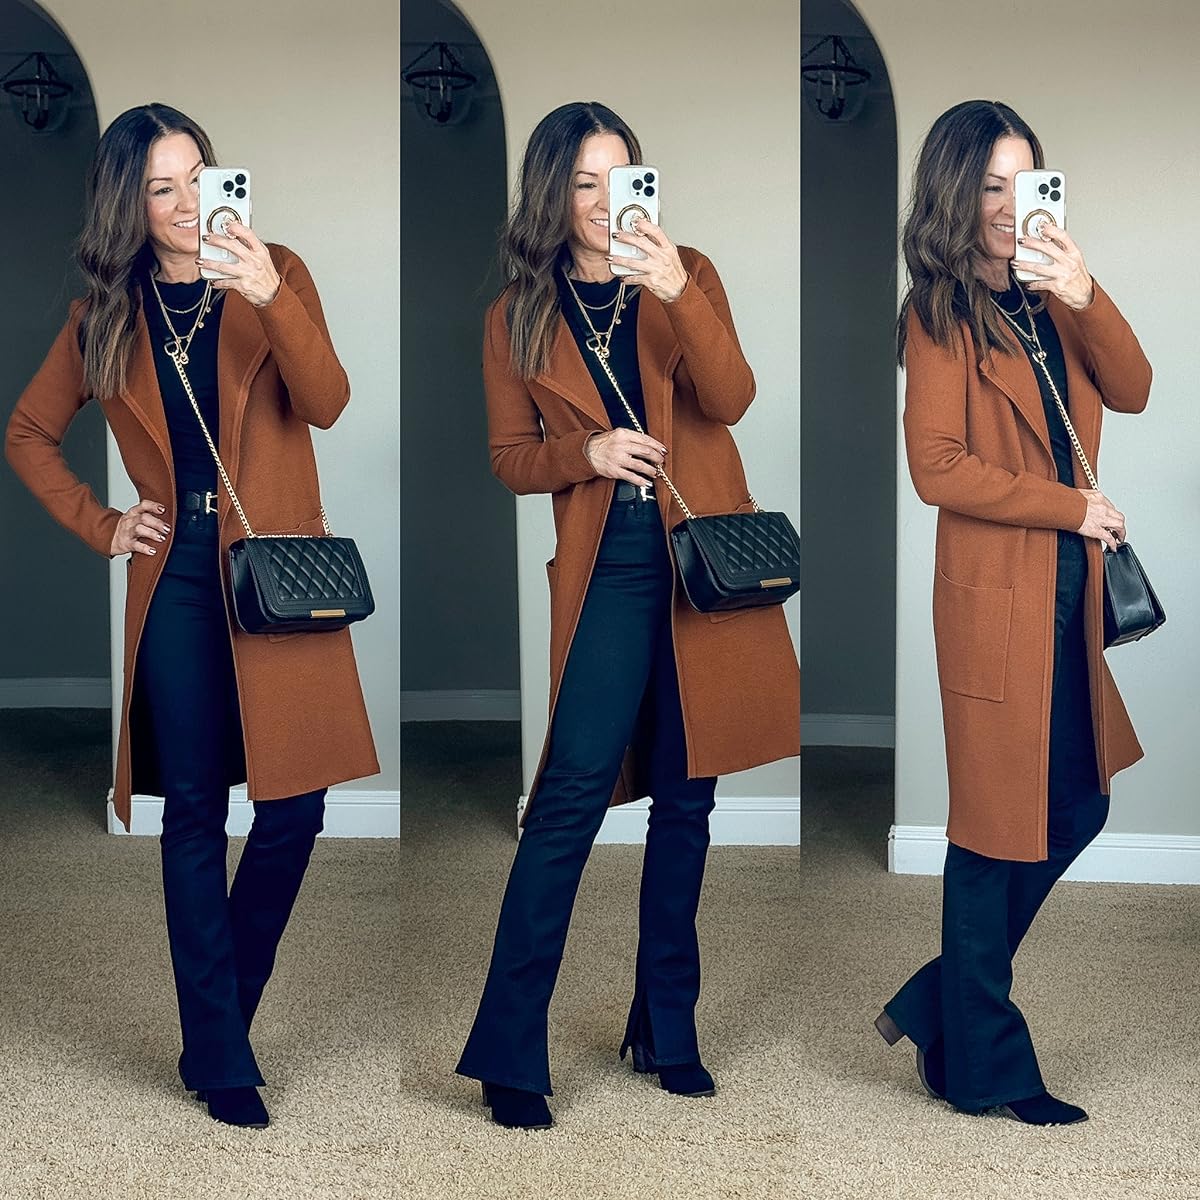 shop last minute thanksgiving outfit ideas and decor | #shop #thanksgiving #thanksgivingoutfit #homedecor #falloutfit #fallfashion #coatigan #cardigan #booties #crossbody #fall #autumn #necklace